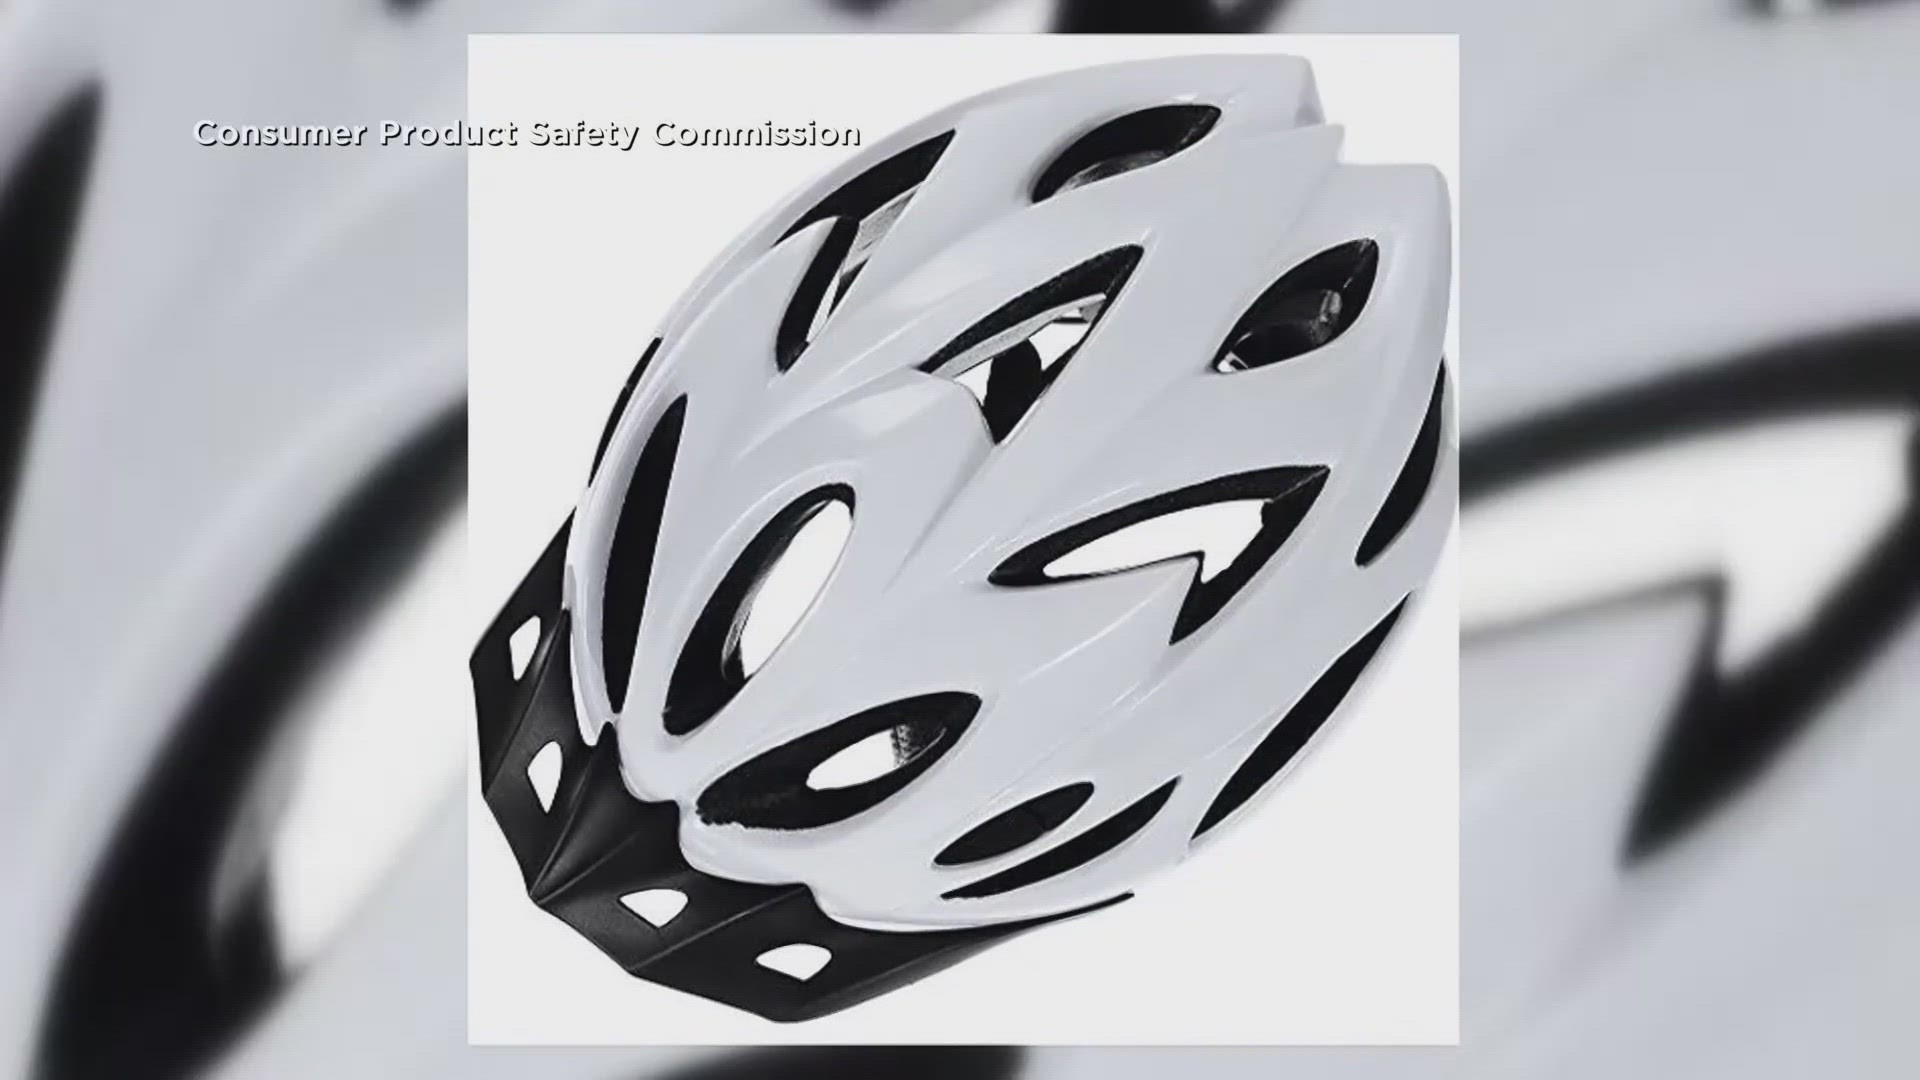 The Consumer Product Safety Commission says the helmets could fail to protect riders in an accident.